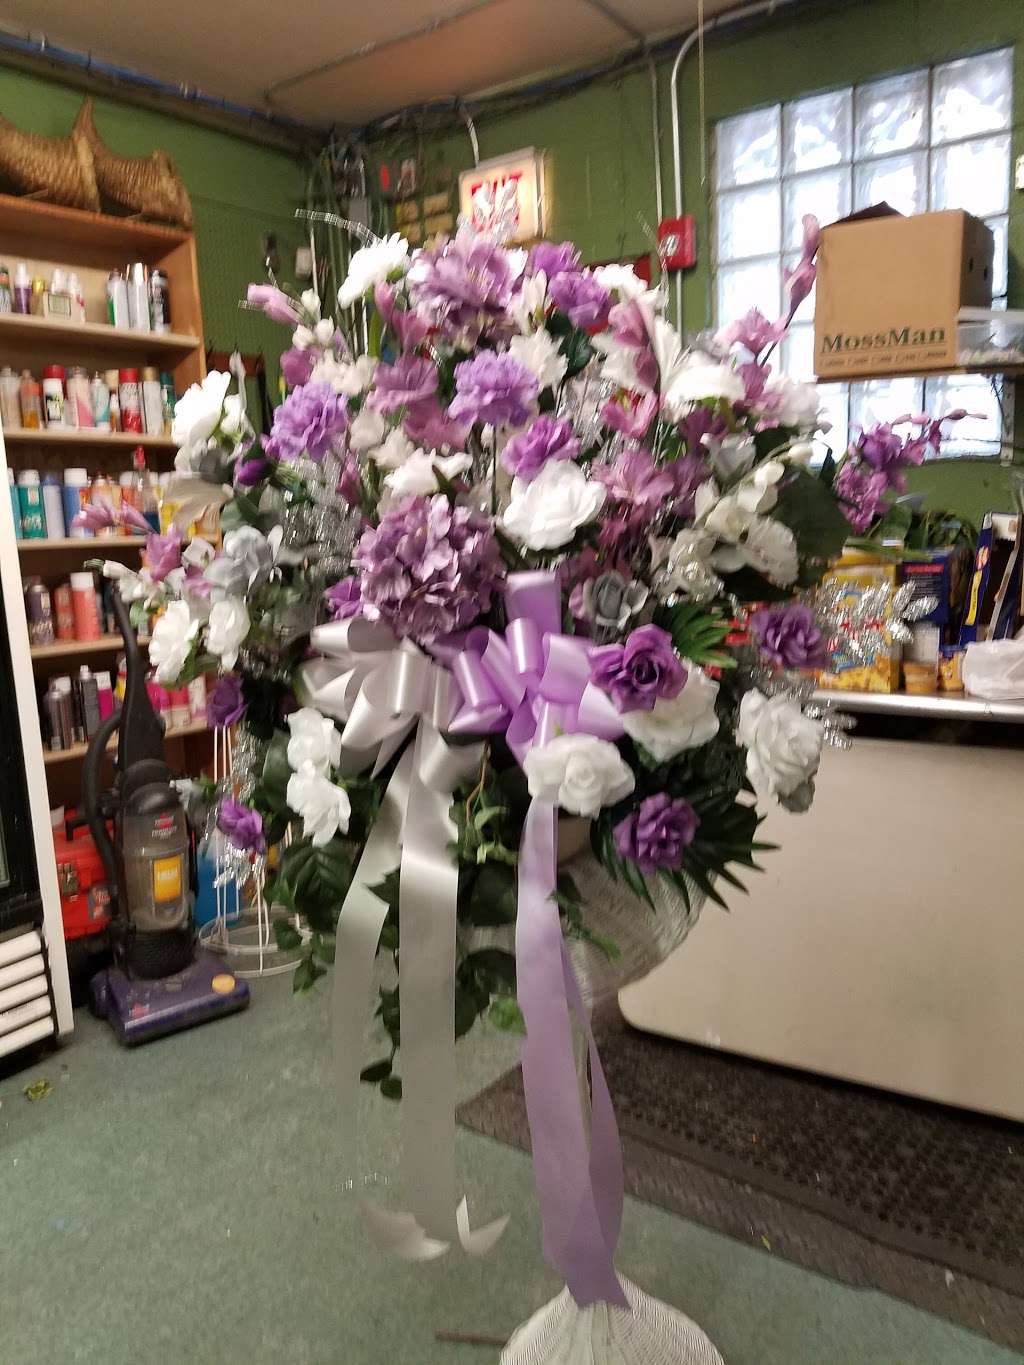 Greenes Floral & Balloon | 9112 S Ashland Ave, Chicago, IL 60620, United States | Phone: (708) 926-2737OR8727033956